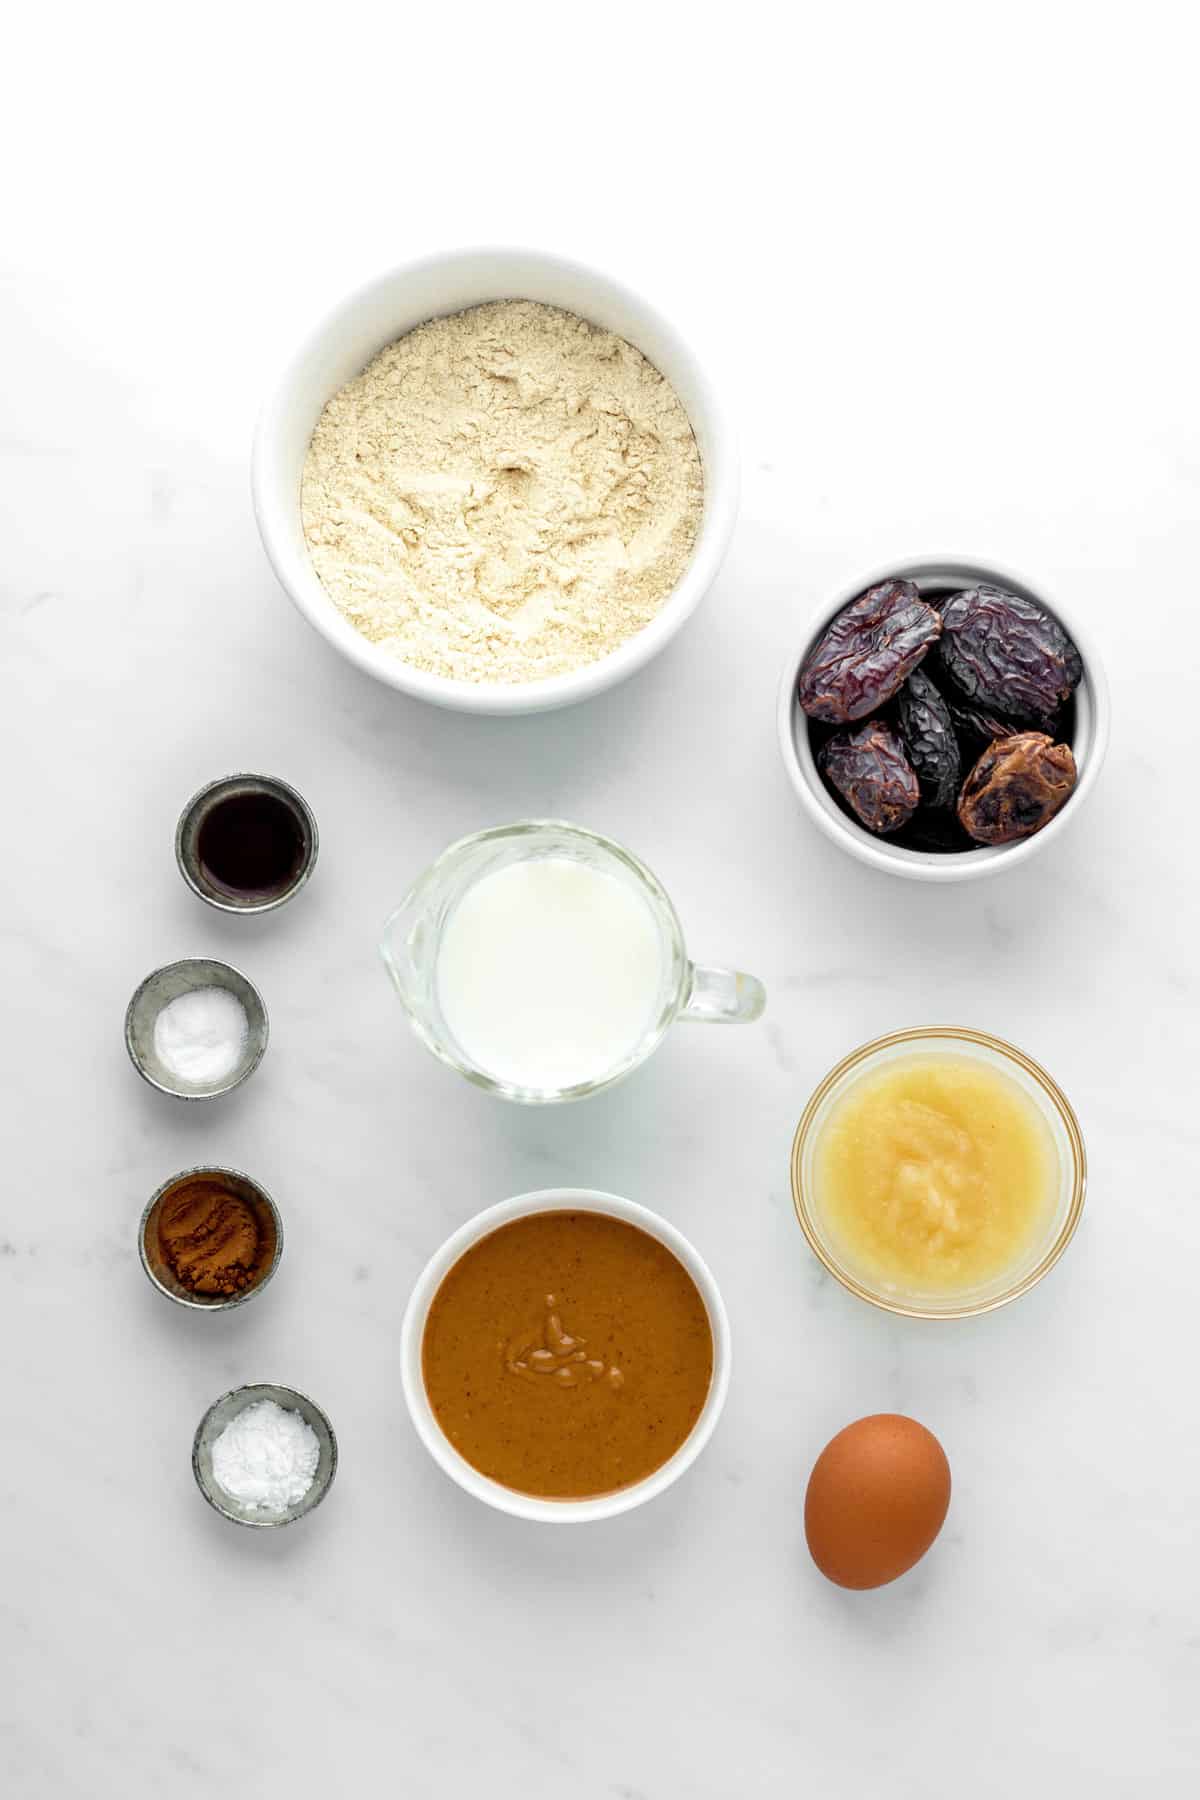 Ingredients for date muffin recipe.